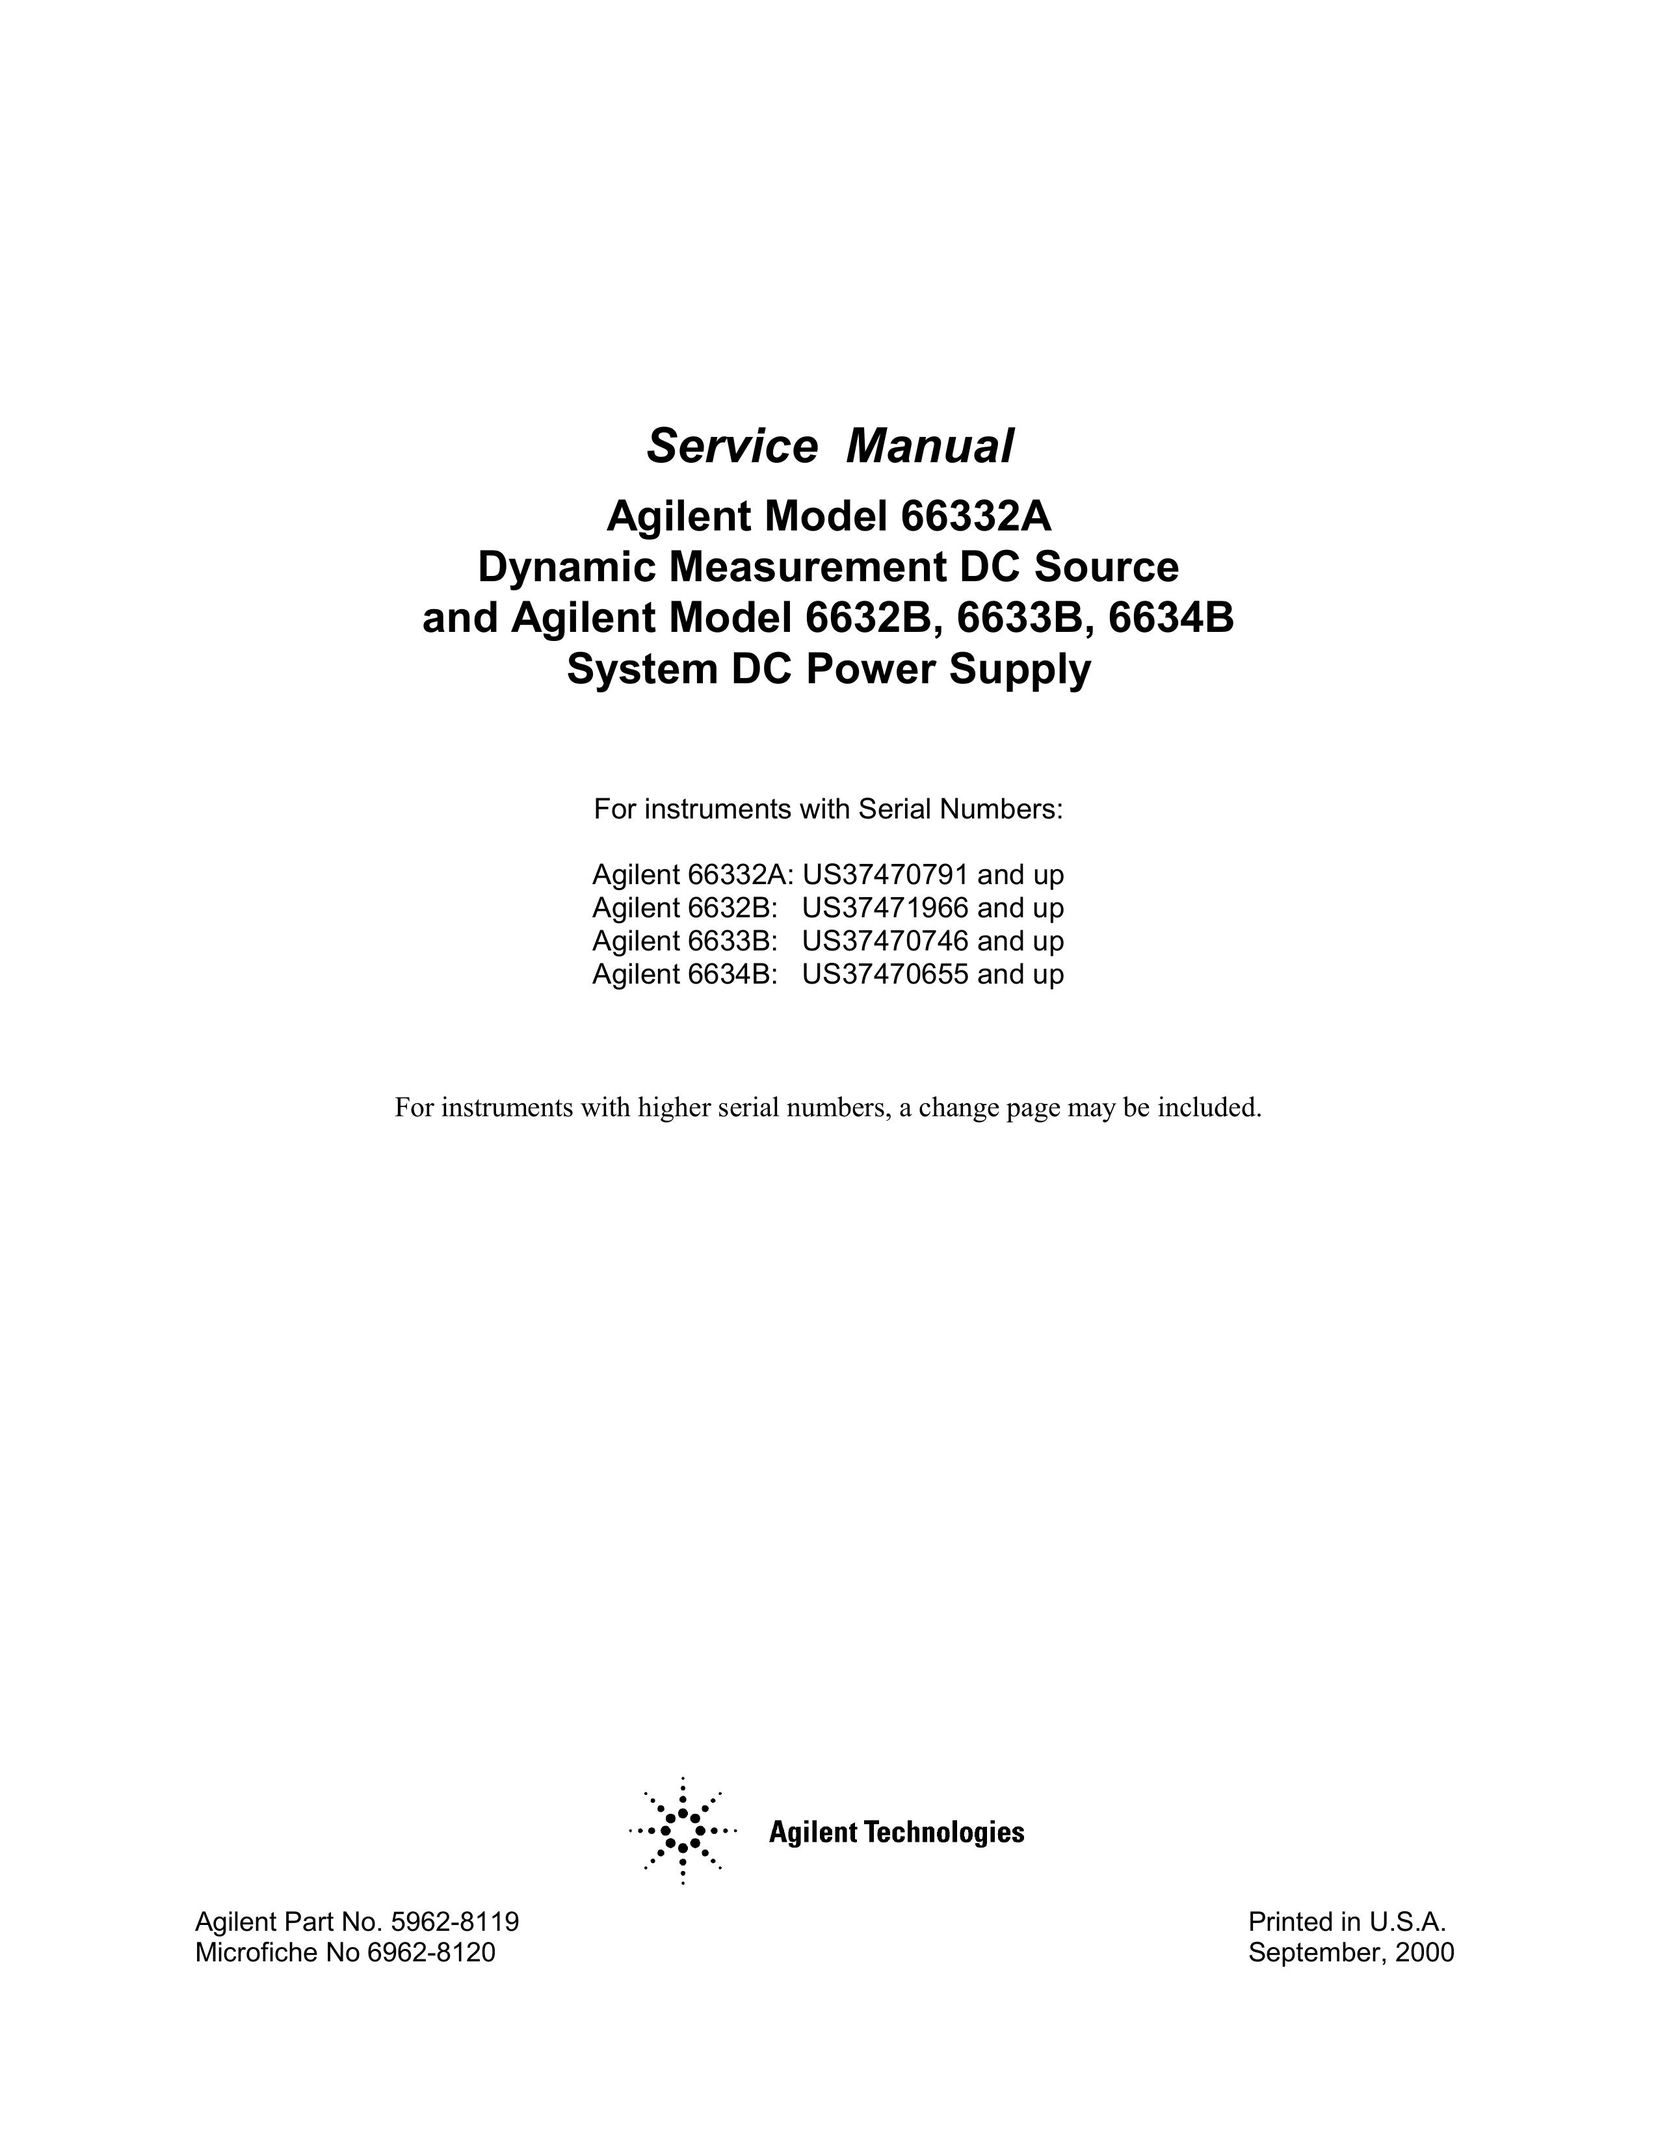 Agilent Technologies 6634B Stereo System User Manual (Page 1)